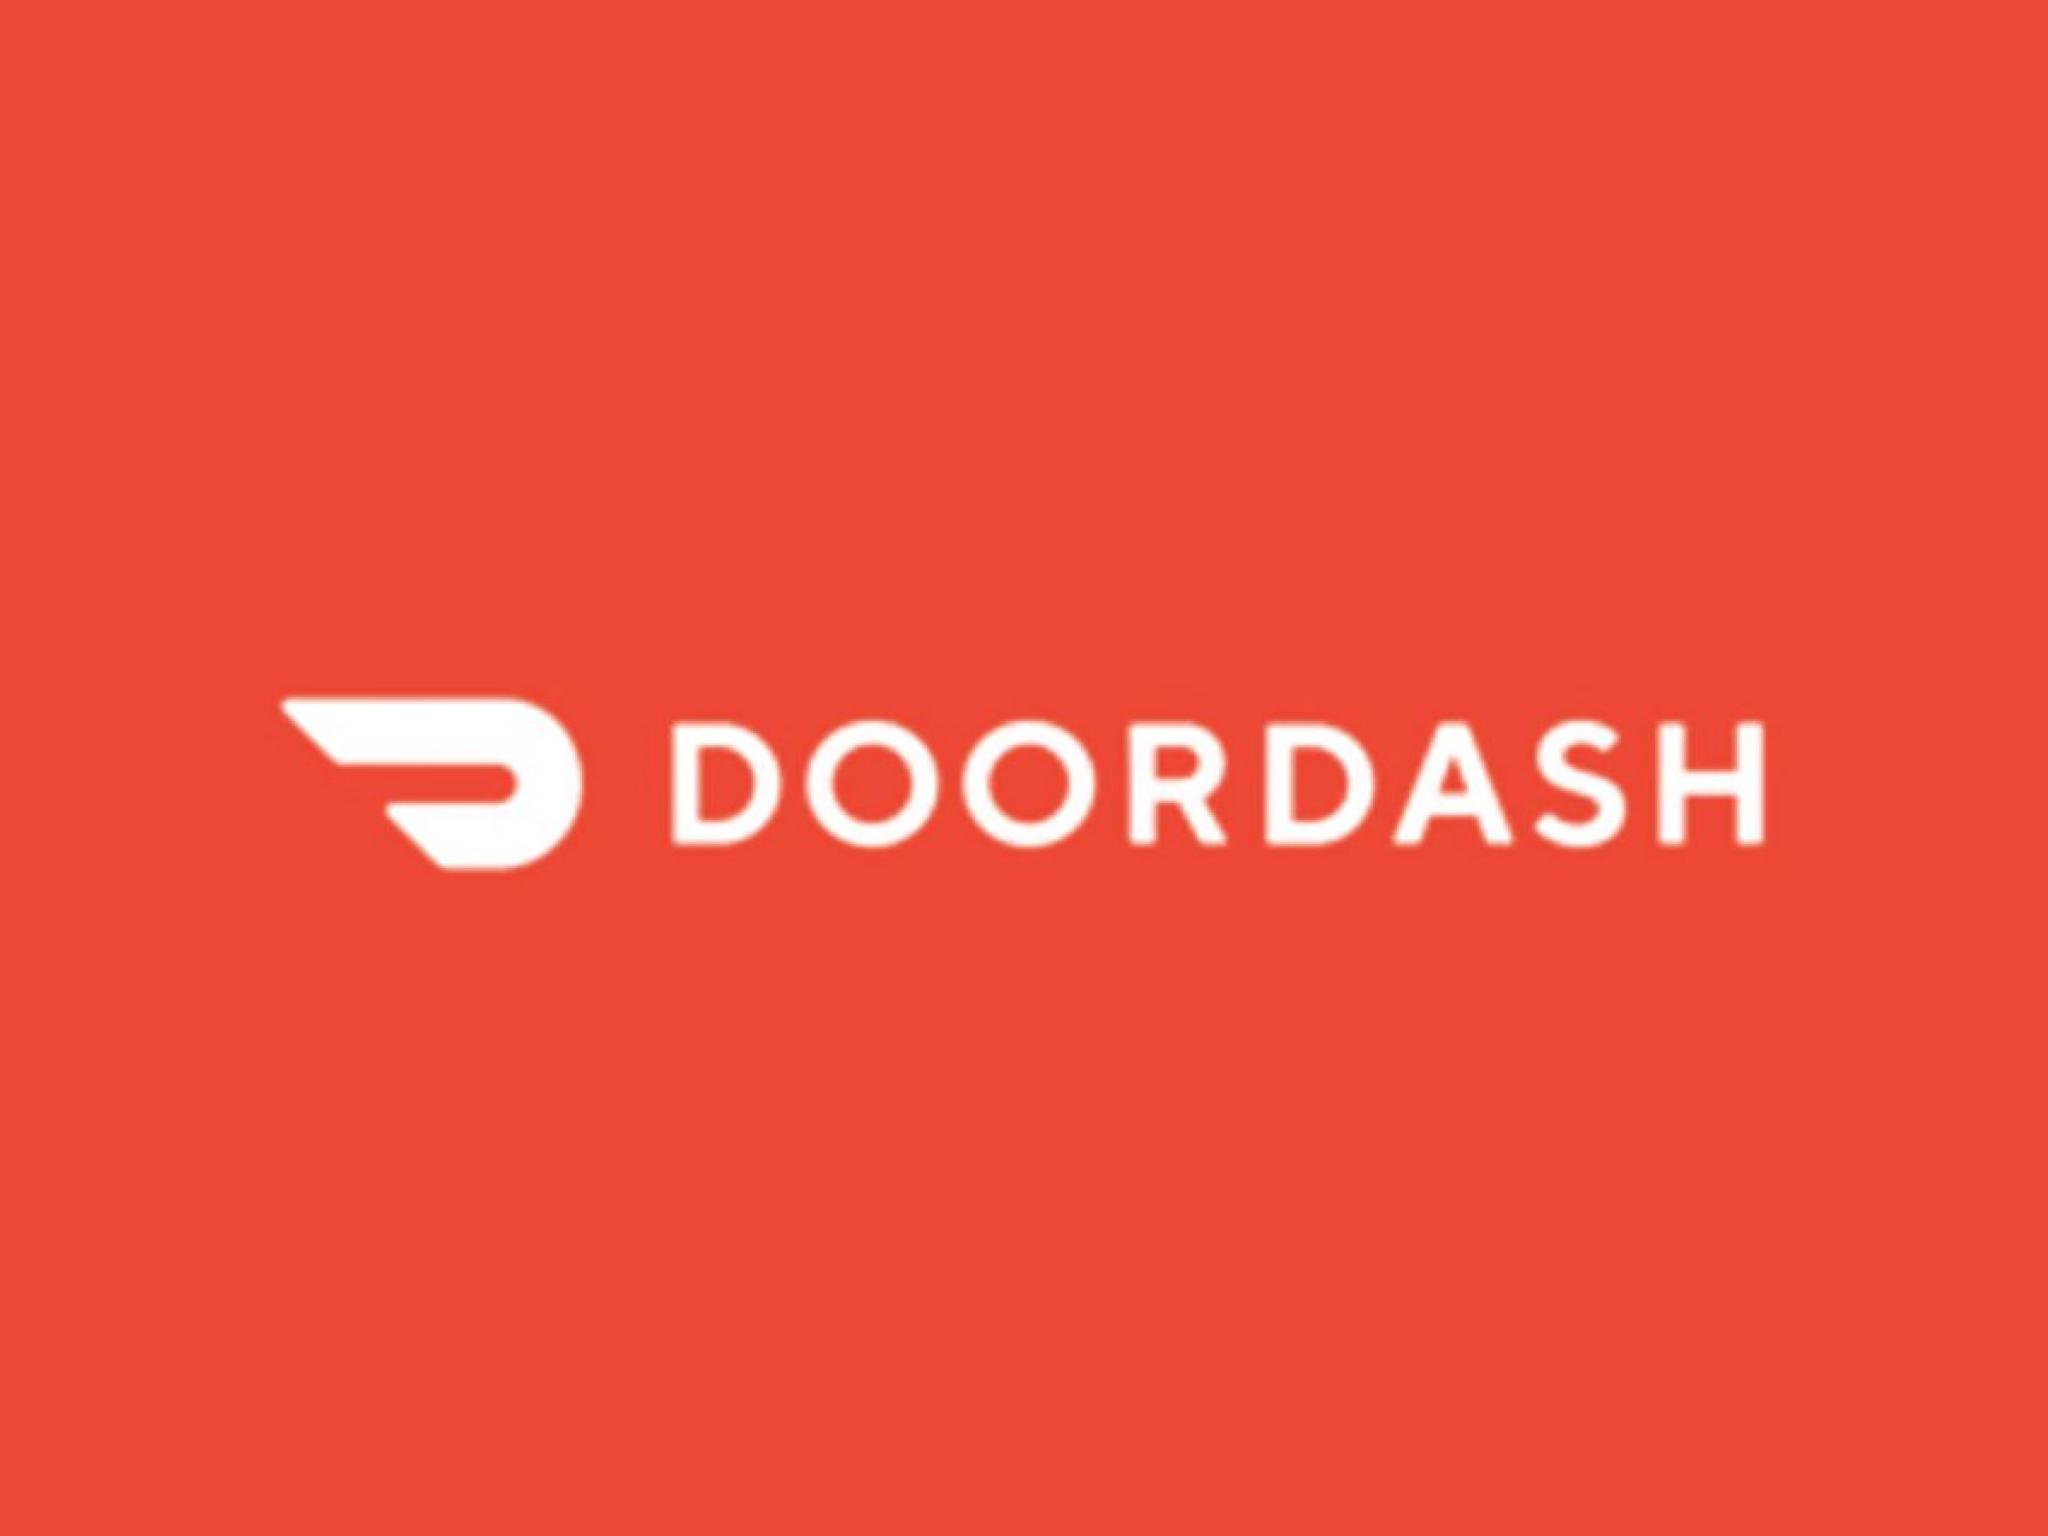  why-doordash-shares-are-trading-lower-by-around-12-here-are-other-stocks-moving-in-fridays-mid-day-session 